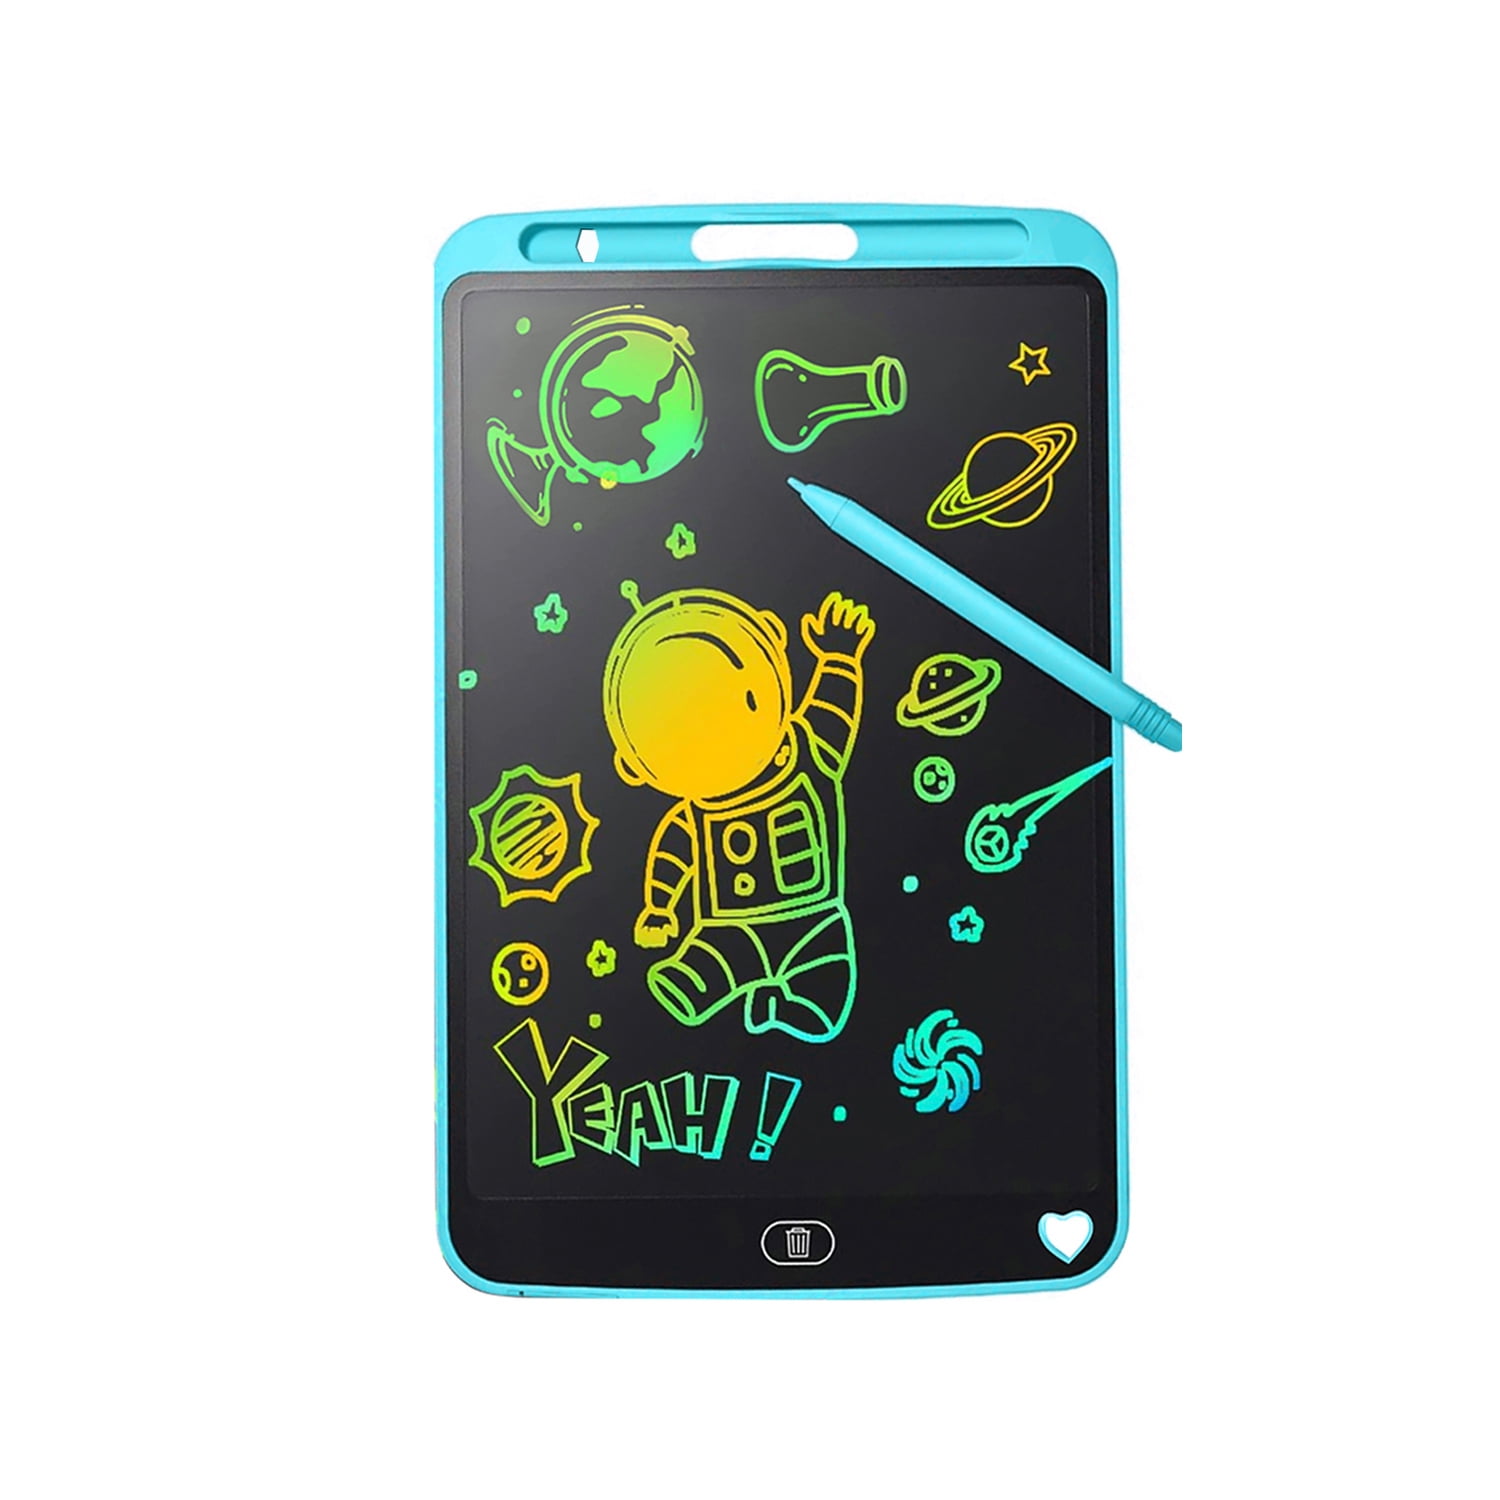 LCD Writing Tablet for Kids,10.5 inch Eye Protection Monochrome